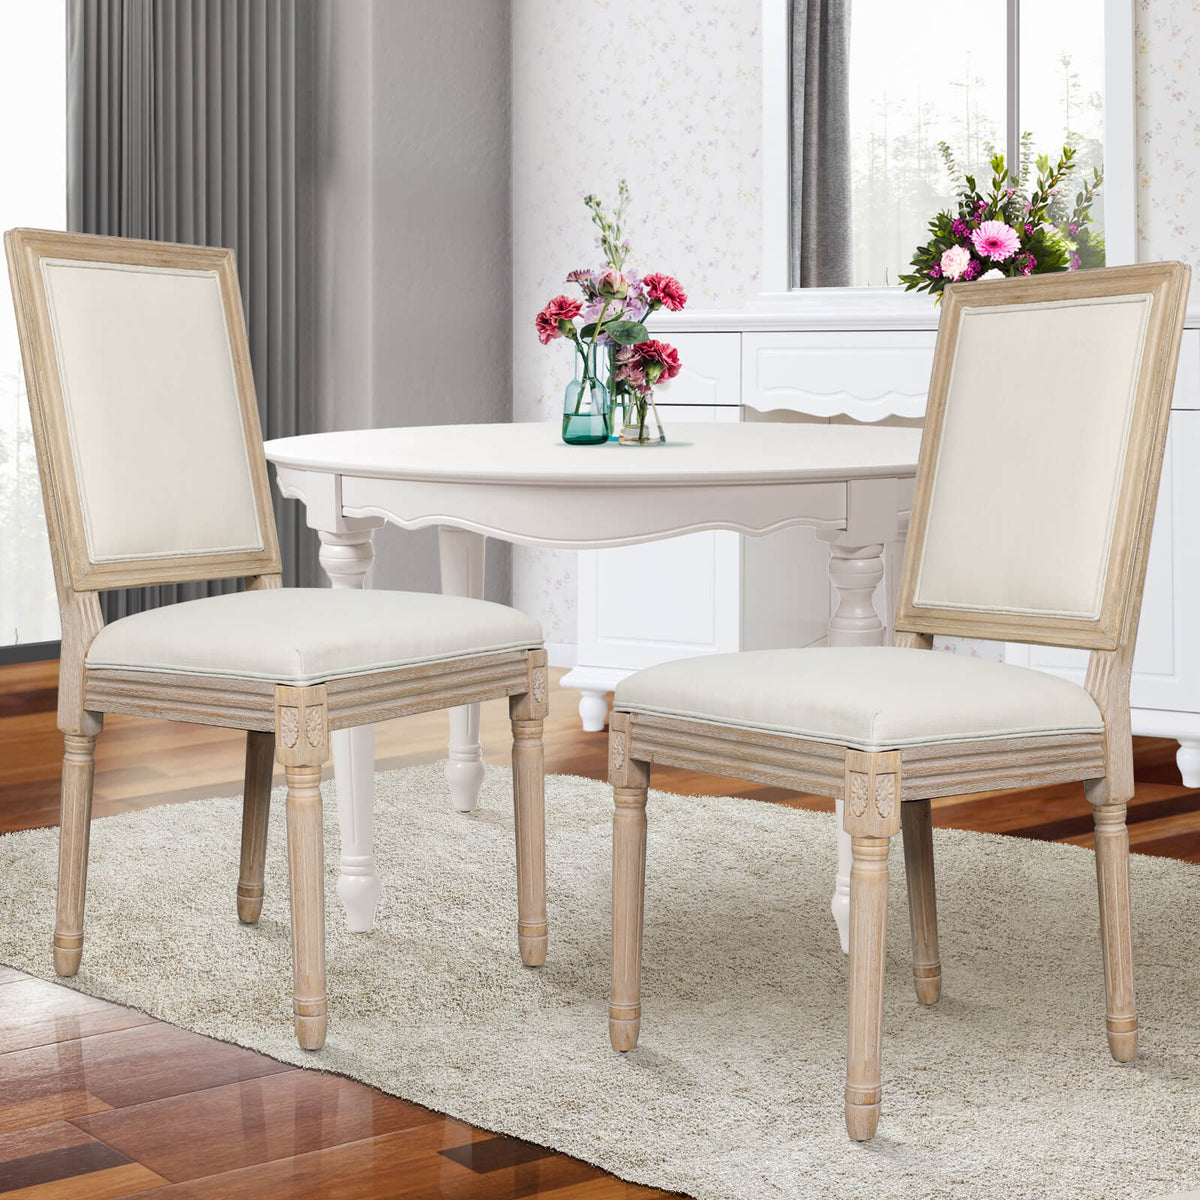 2 Pcs French Dining Chair, Linen Fabric Upholstered Farmhouse Dining Chairs